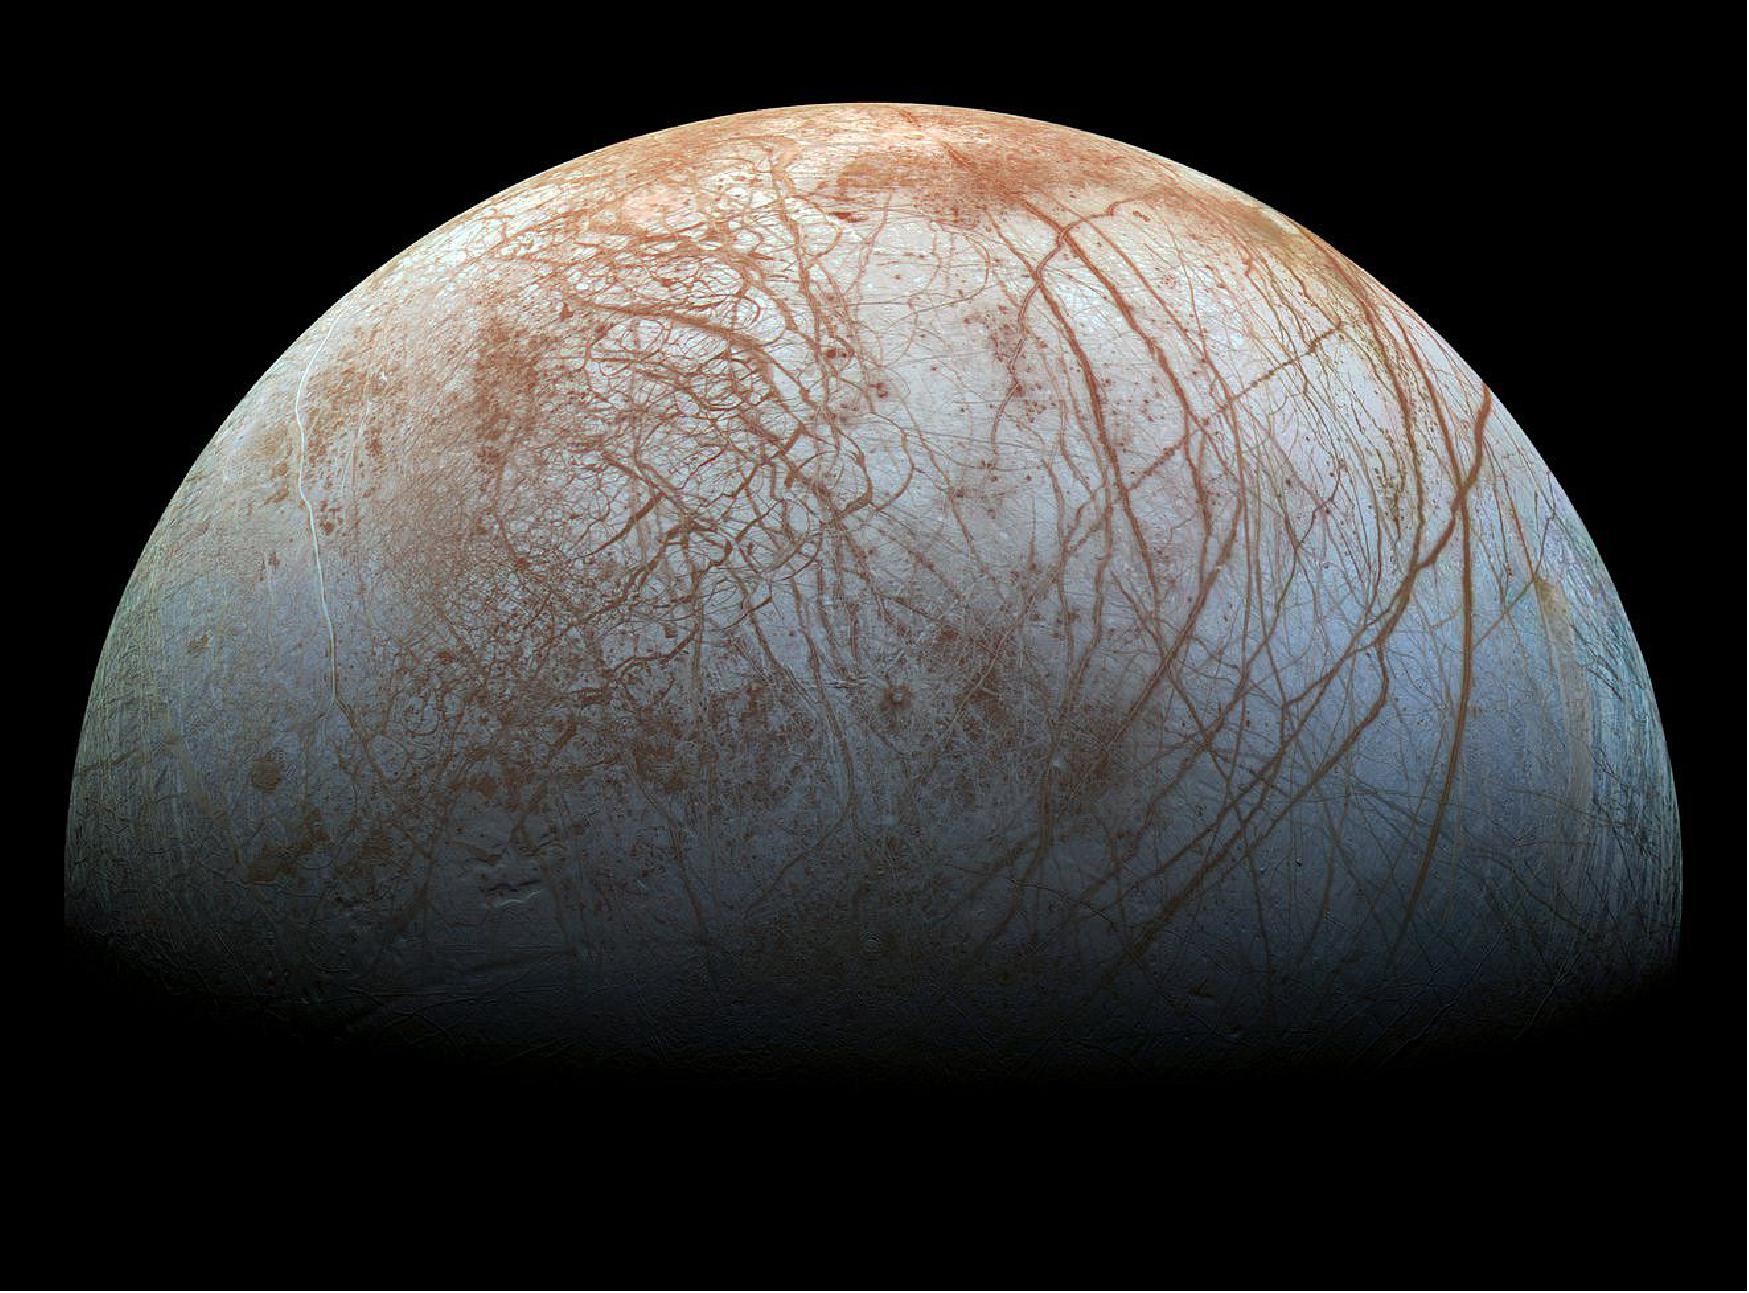 Figure 16: This color view of Jupiter's moon Europa was captured by NASA's Galileo spacecraft in the late 1990s. Scientists are studying processes that affect the surface as they prepare to explore the icy body (image credit: NASA/JPL-Caltech/SETI Institute)